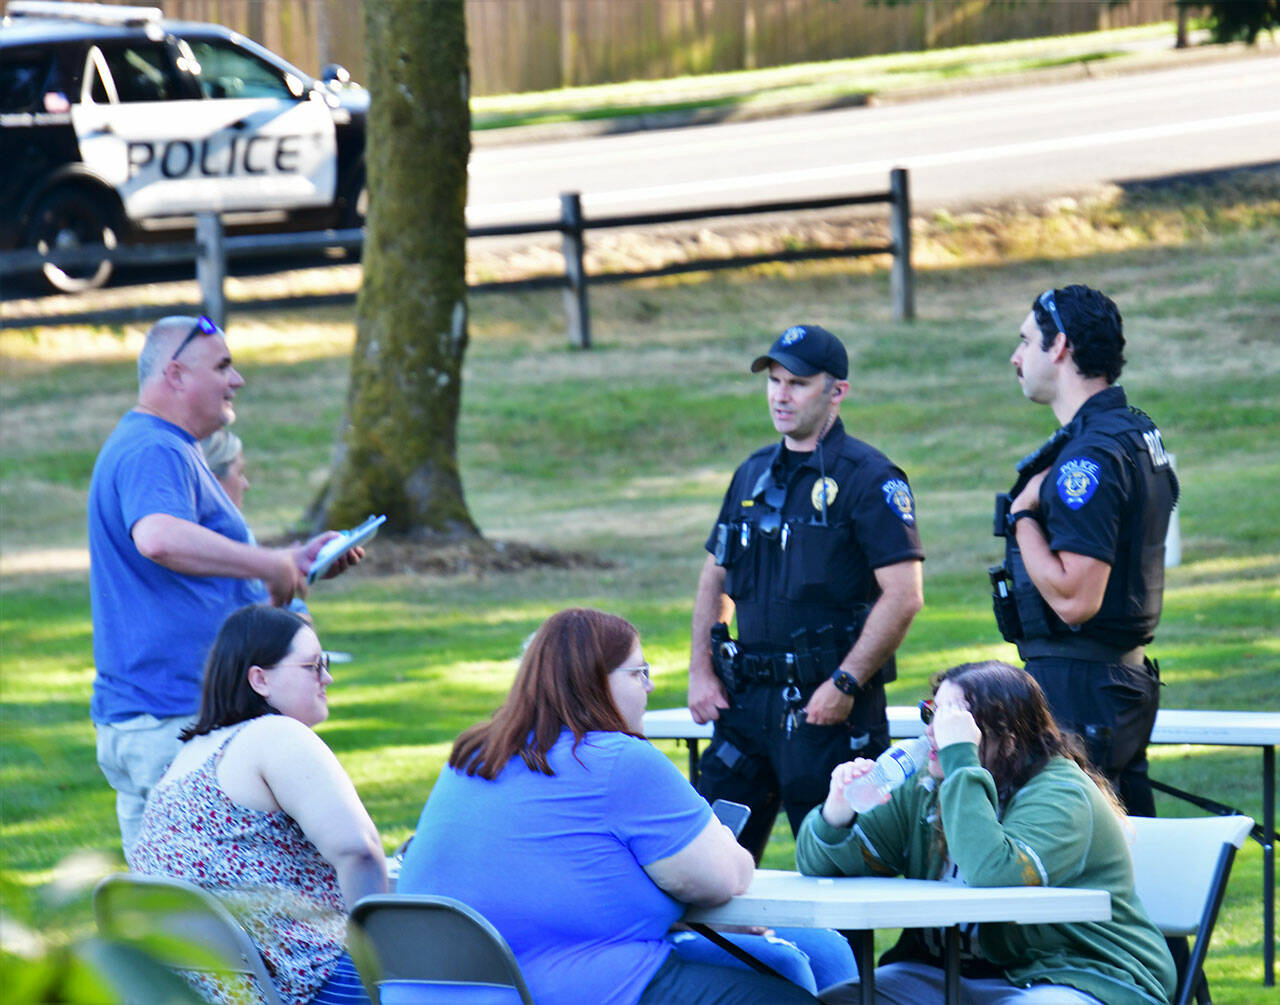 Members of the Federal Way Police Department chat with community members on Aug. 2. Photo by Bruce Honda